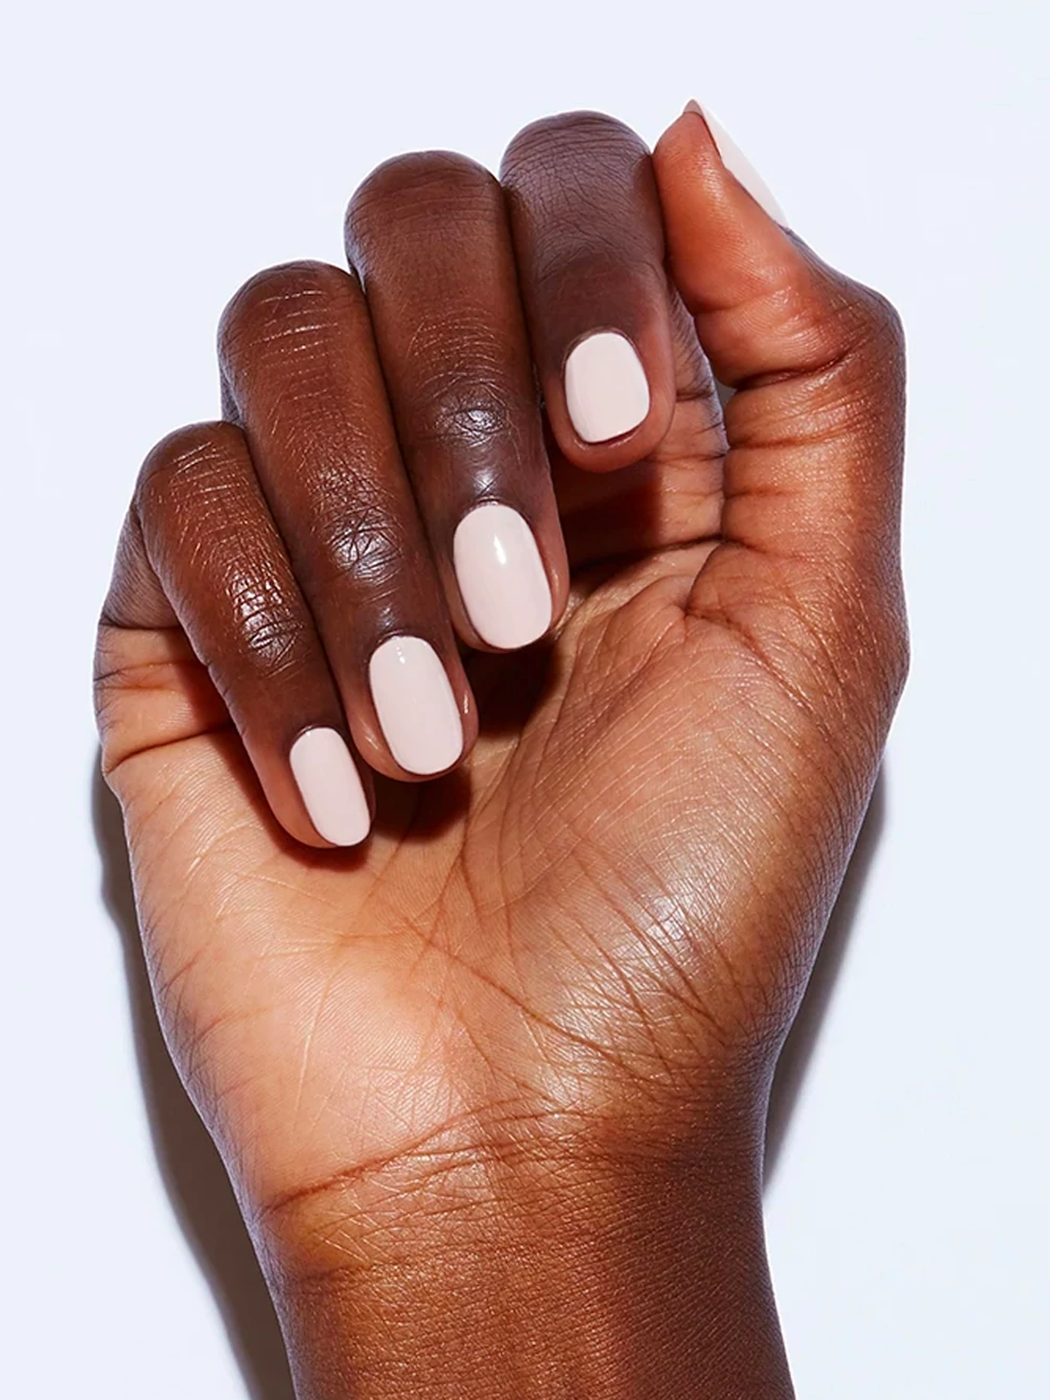 Has anyone gone to a salon and asked for this new trend of a new color on  each nail, so 5 (or more if both hands are different) and has the nail